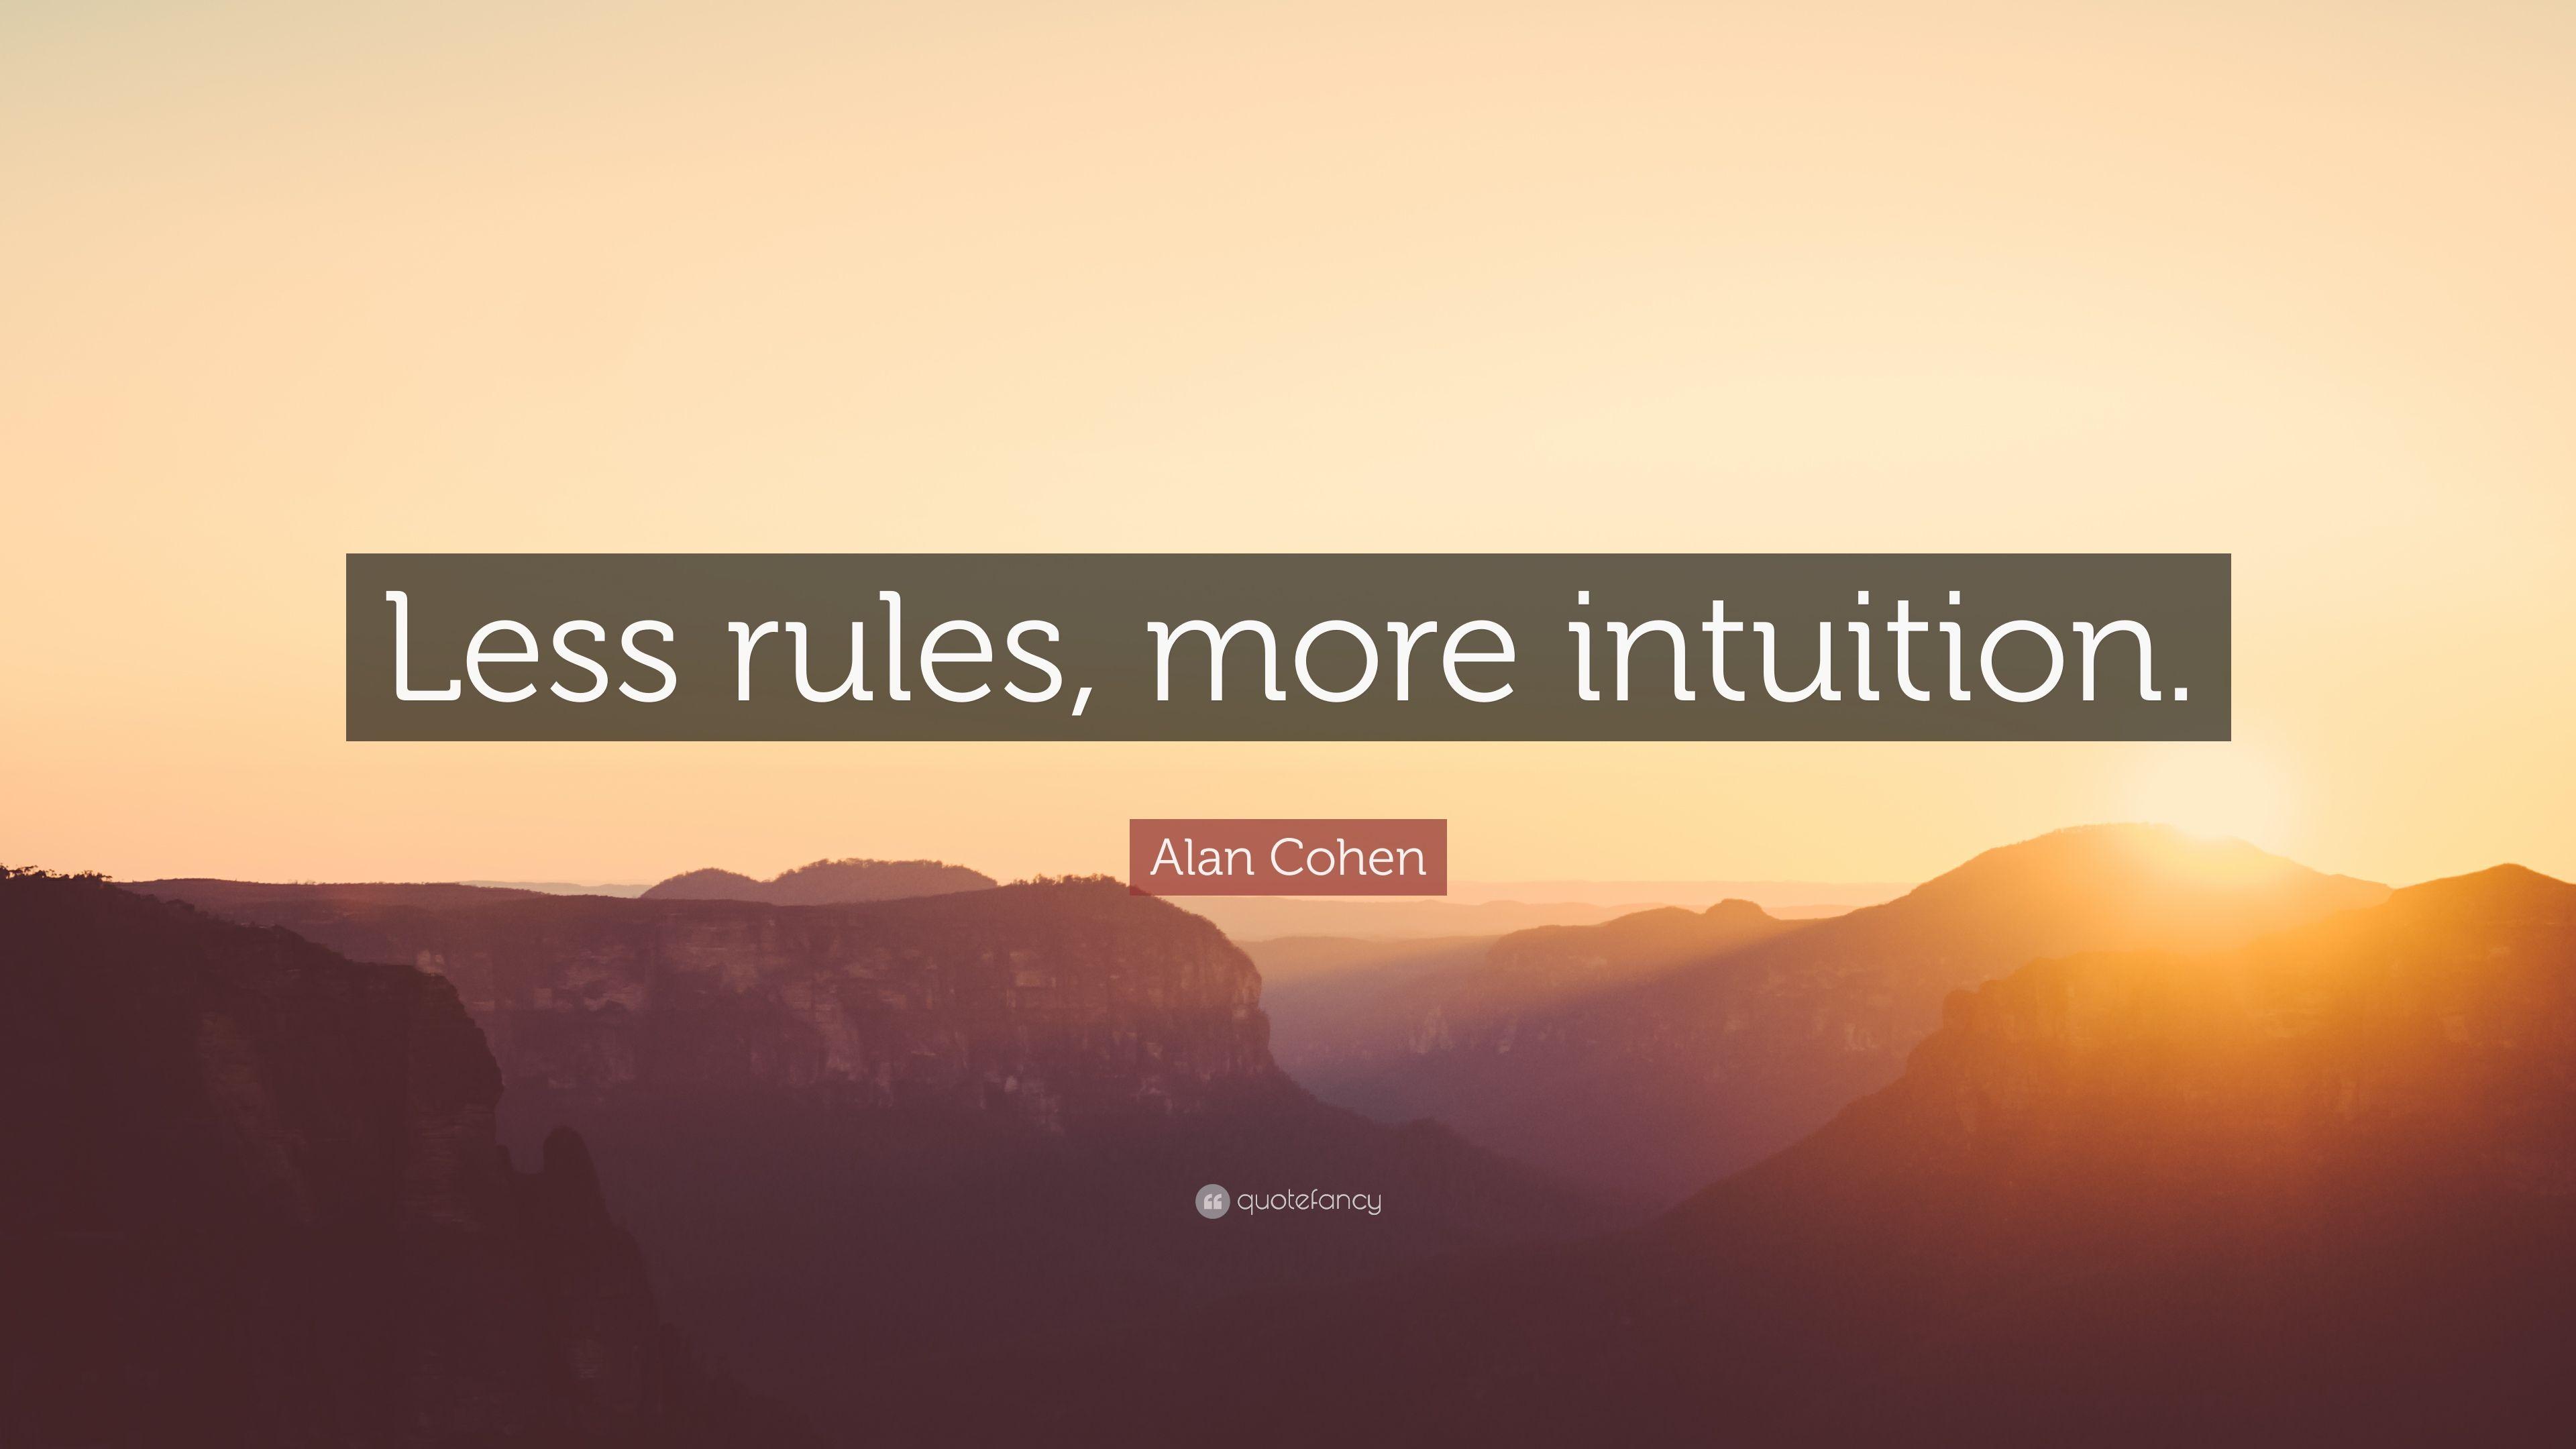 Alan Cohen Quote: “Less rules, more intuition.” 12 wallpaper